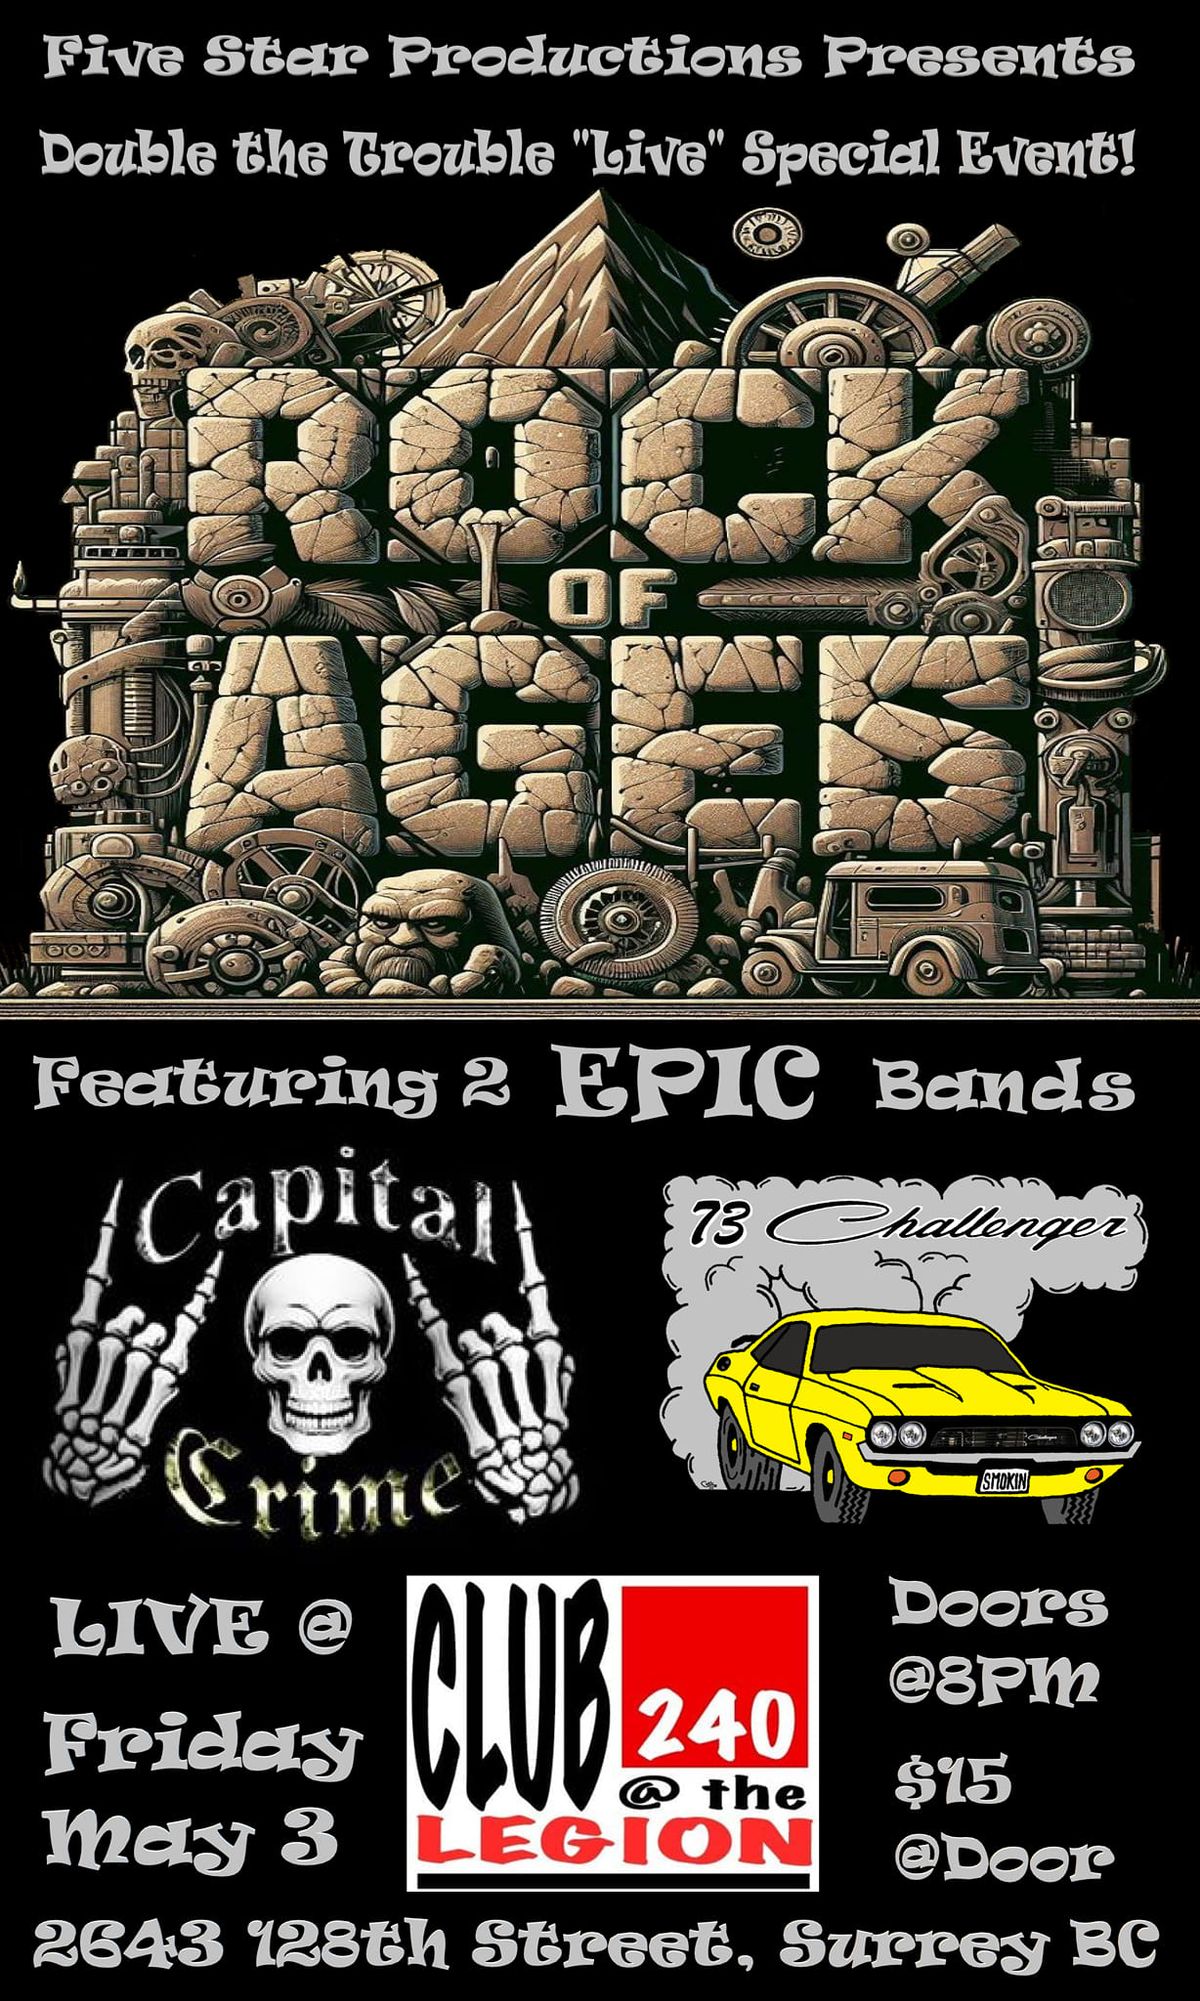 HOT OFF THE PRESS...Rock of Ages with 73 Challenger and Capital Crime